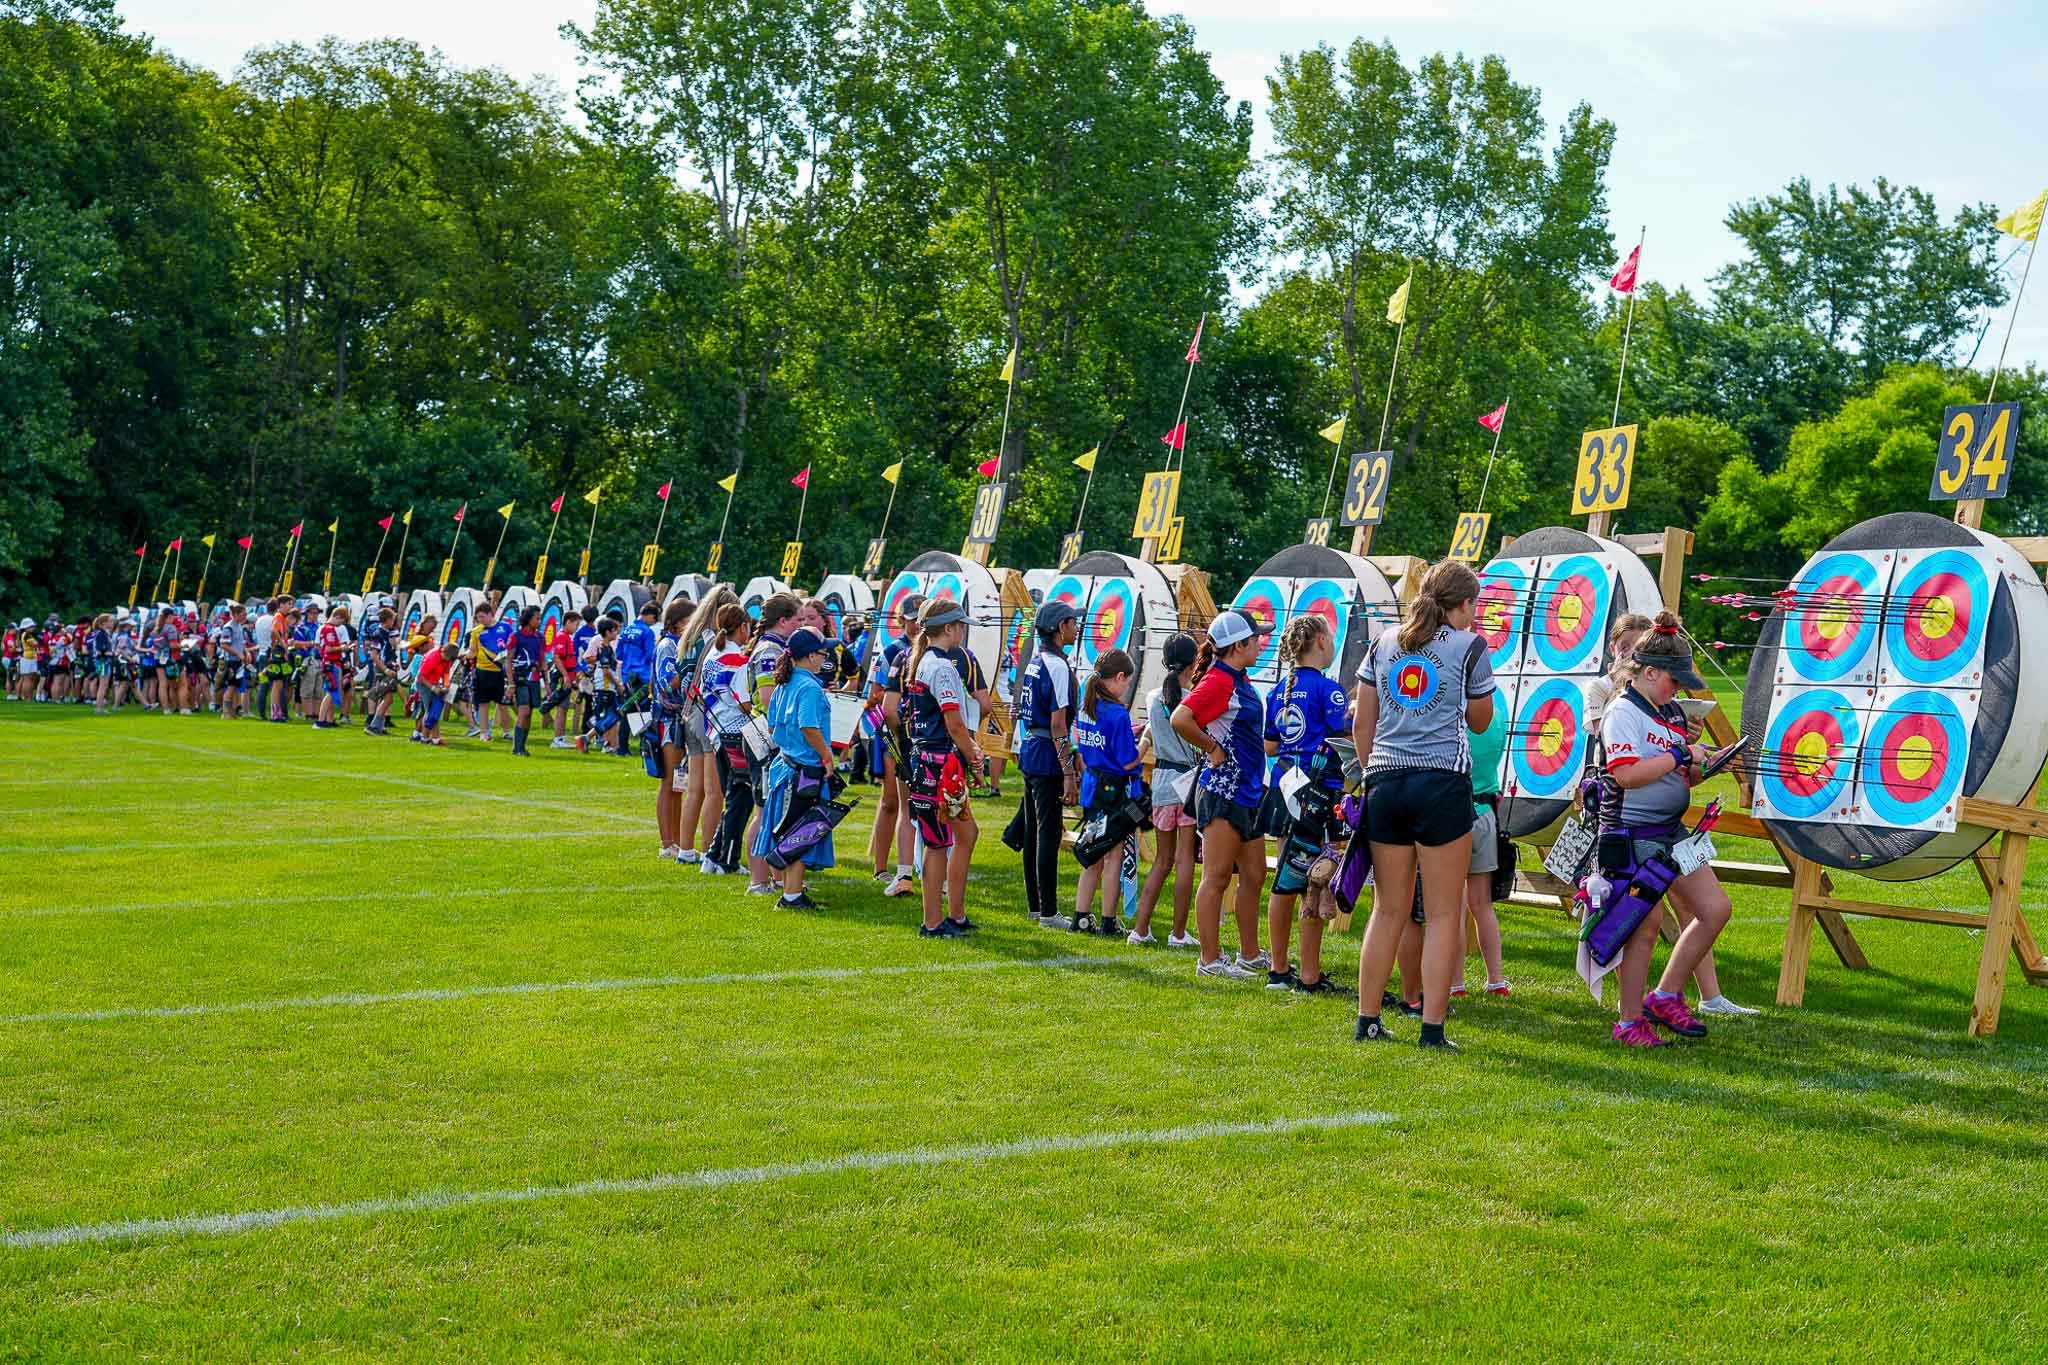 Albuquerque to host the 2024 USA Archery JOAD Target Nationals